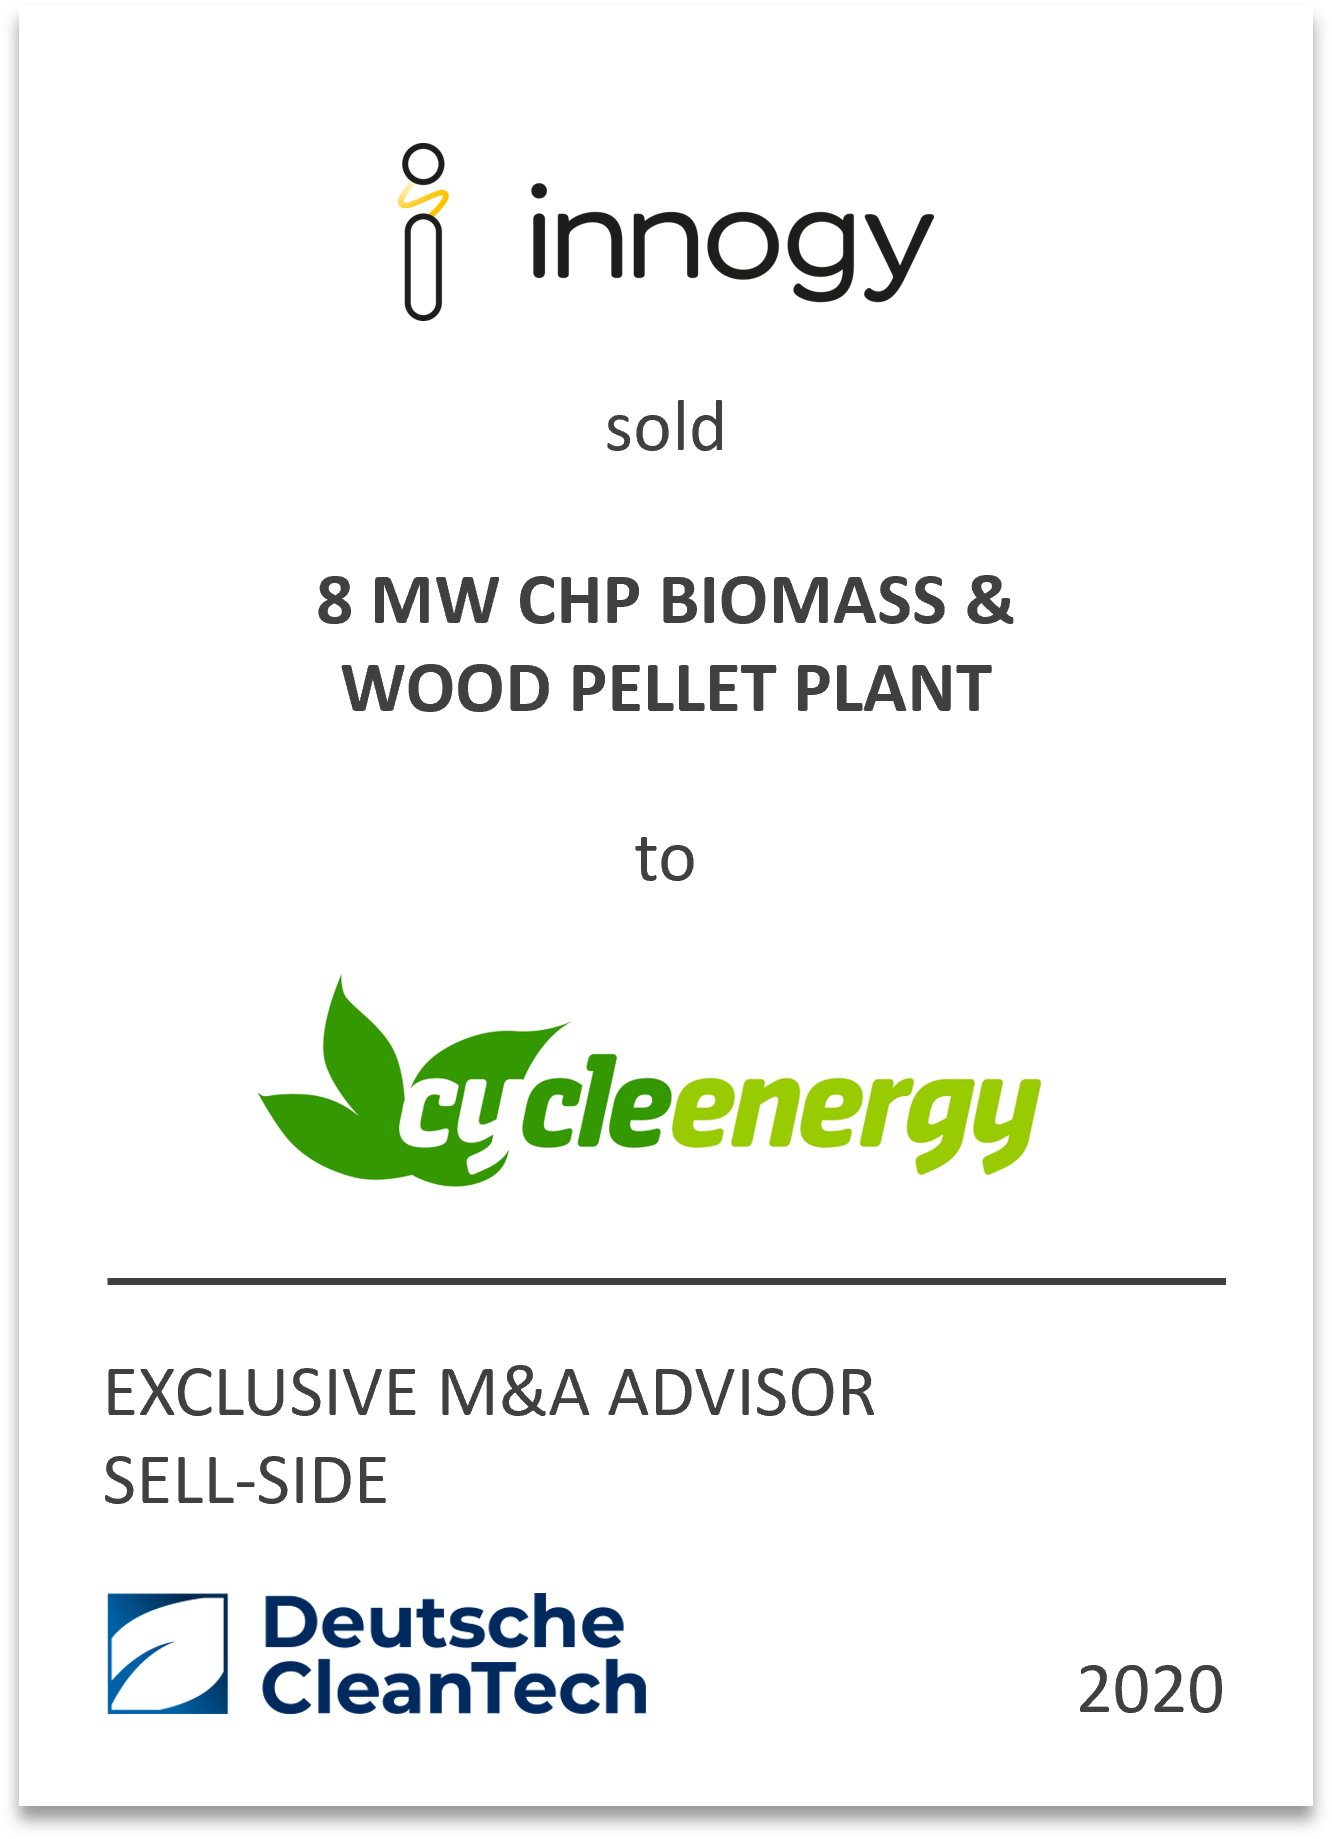 Cycleenergy Holding GmbH, acquired a CHP biomass plant and a wood pellet production plant in Siegen-Wittgenstein from innogy SE